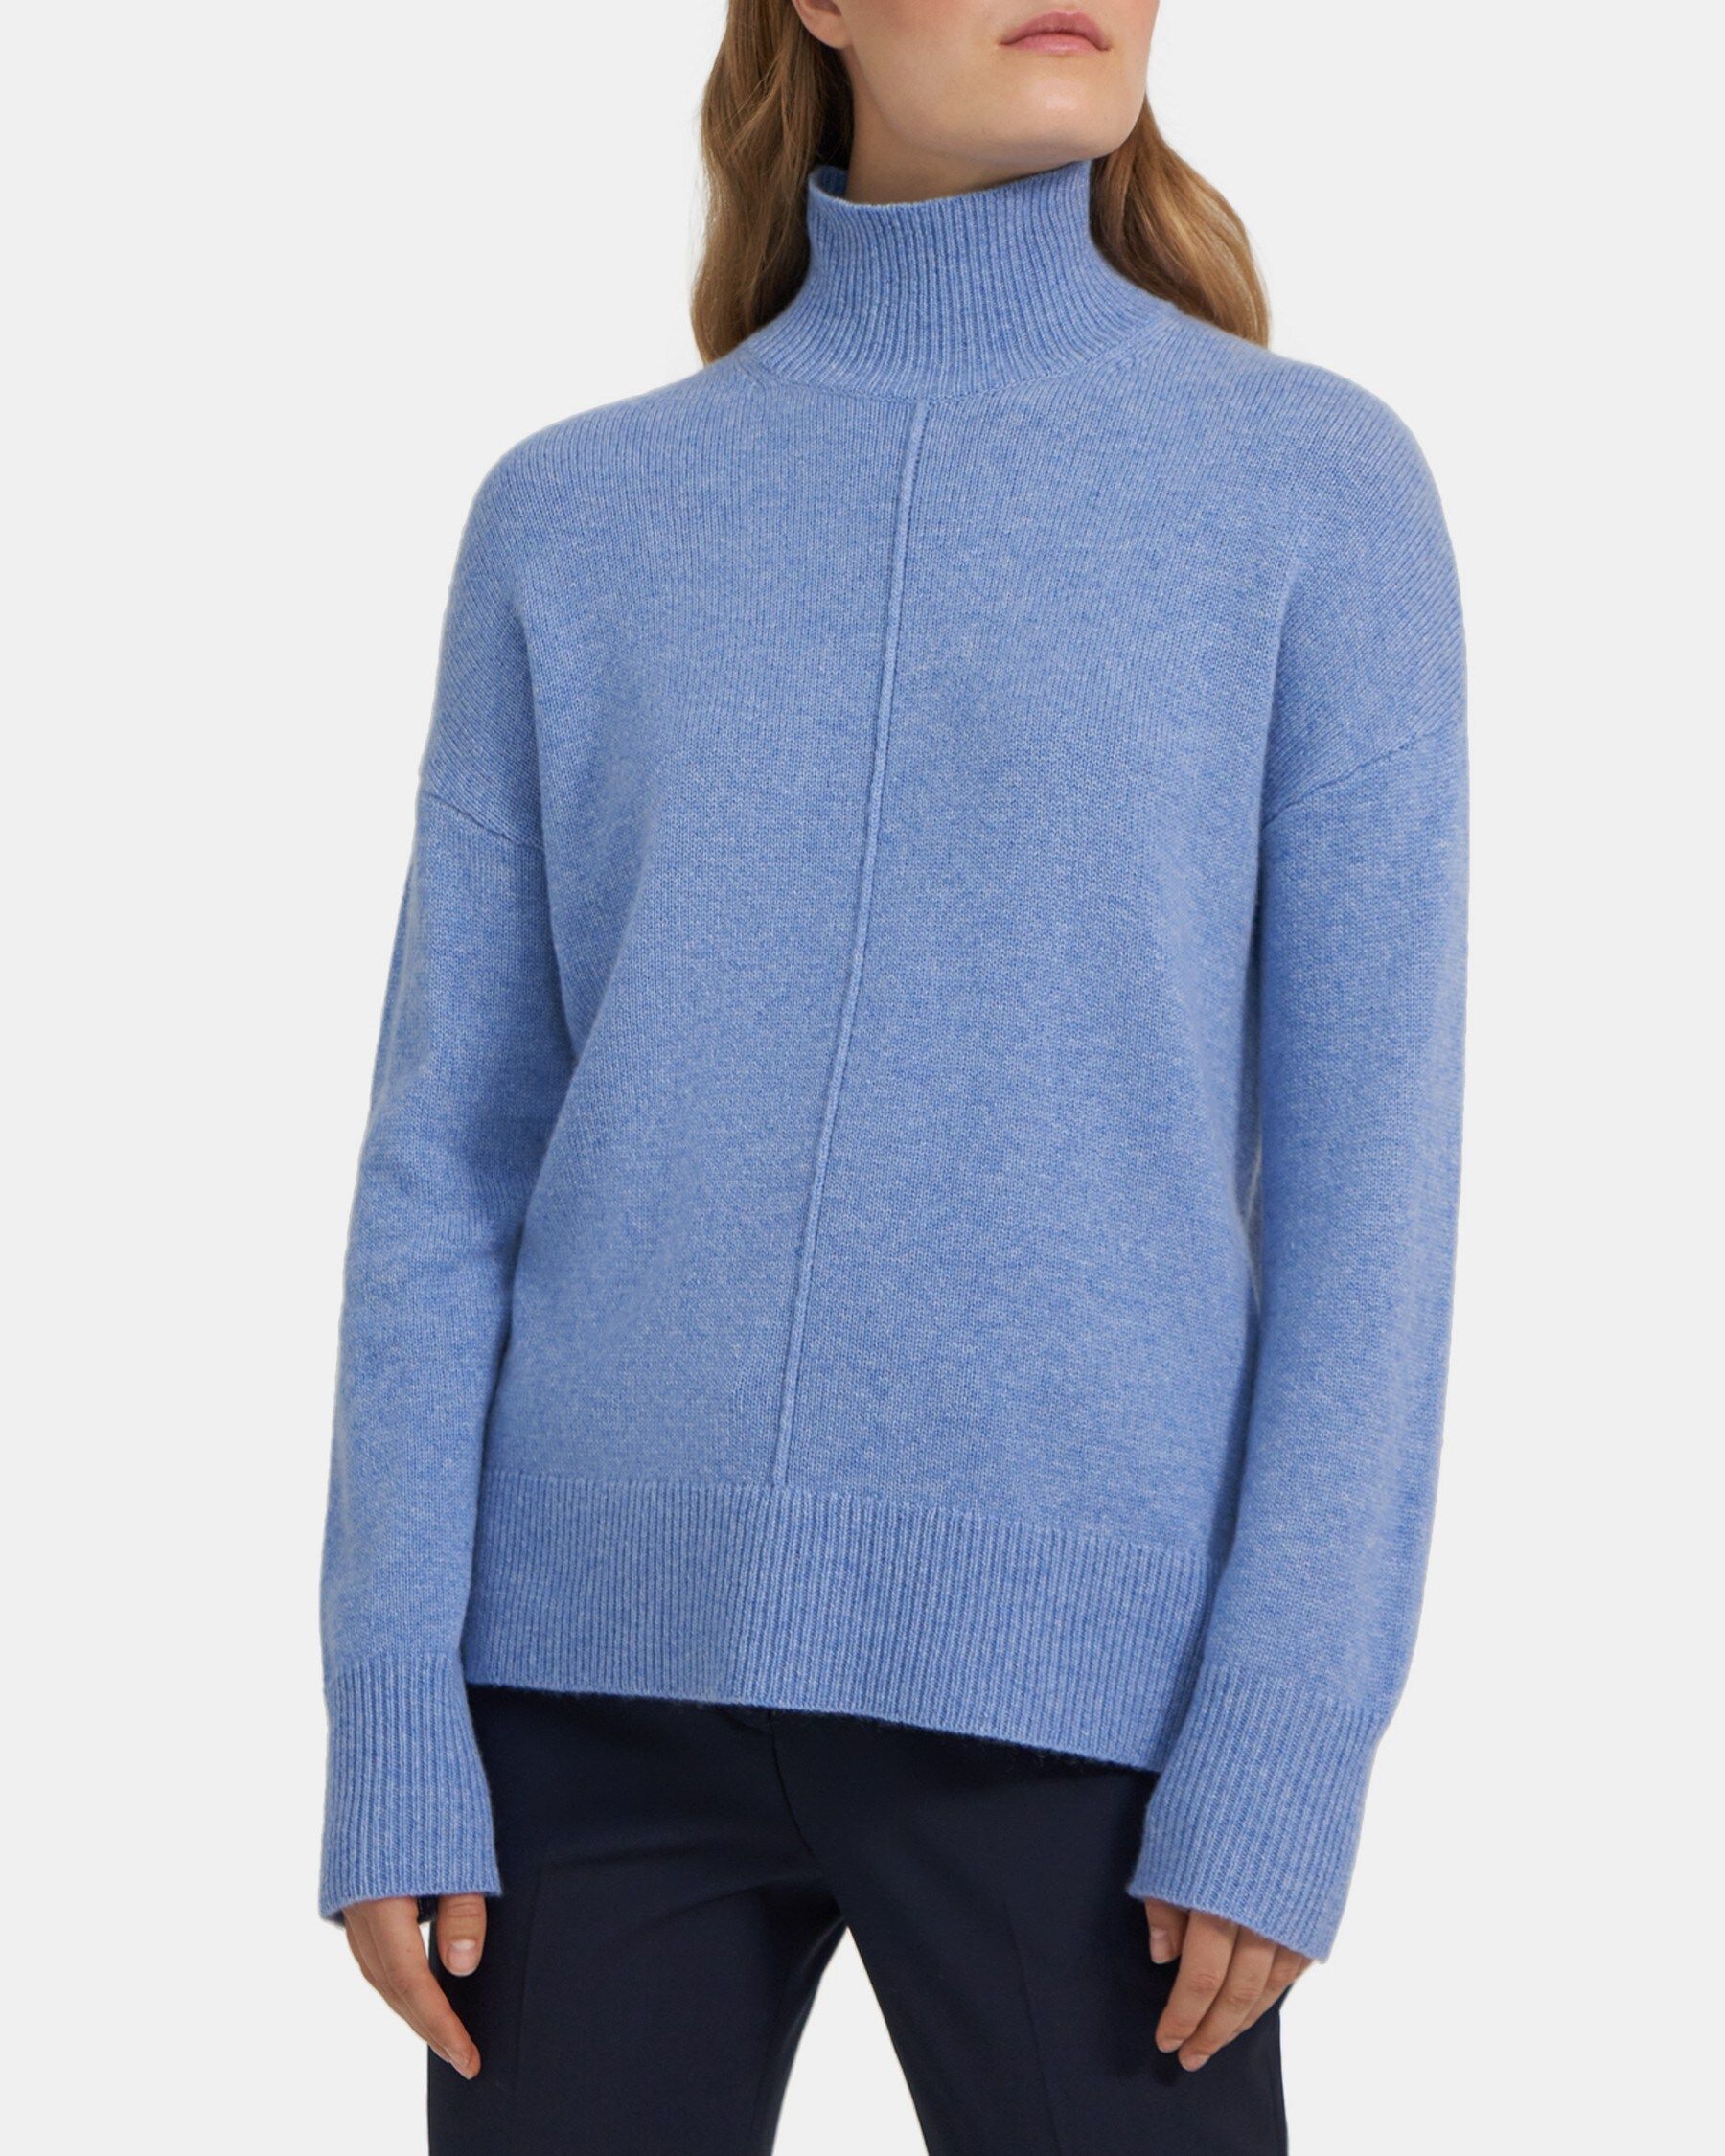 Slouchy Turtleneck in Cashmere | Theory Outlet